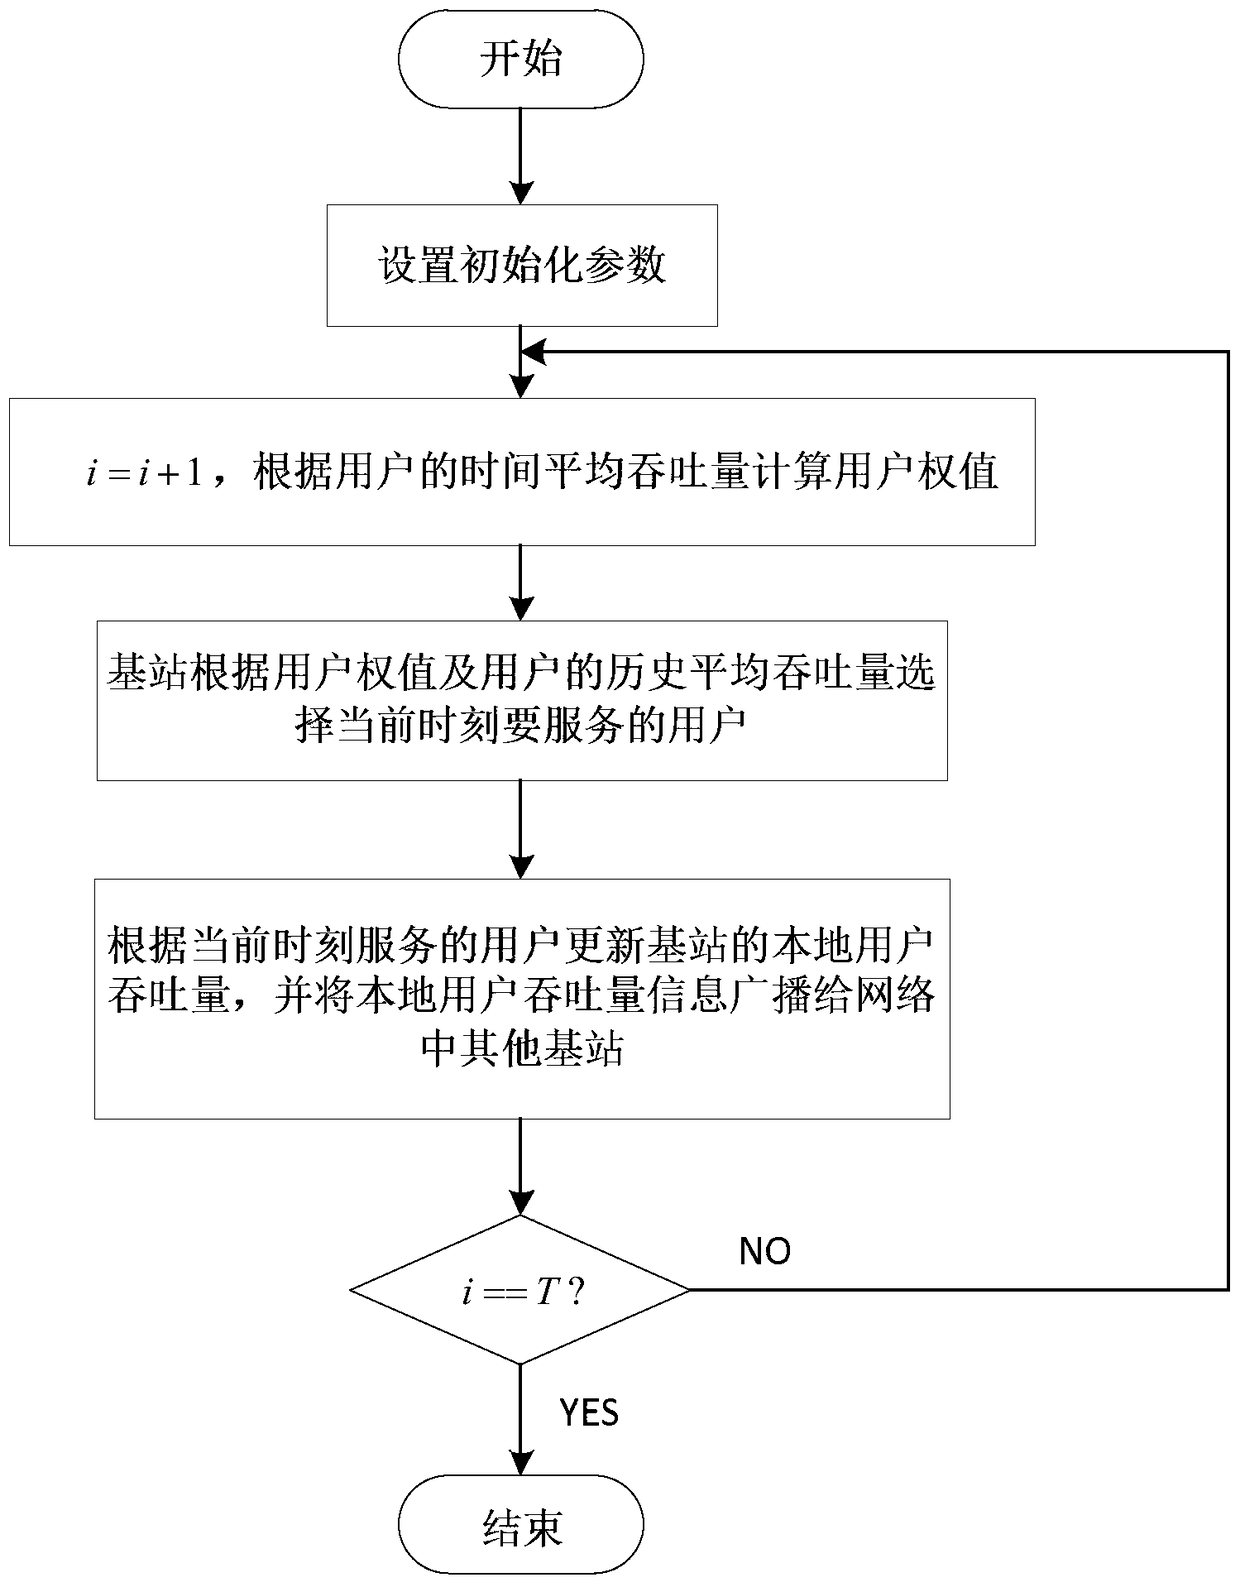 Multi-base station multi-user proportional fair scheduling method with guaranteed quality of service